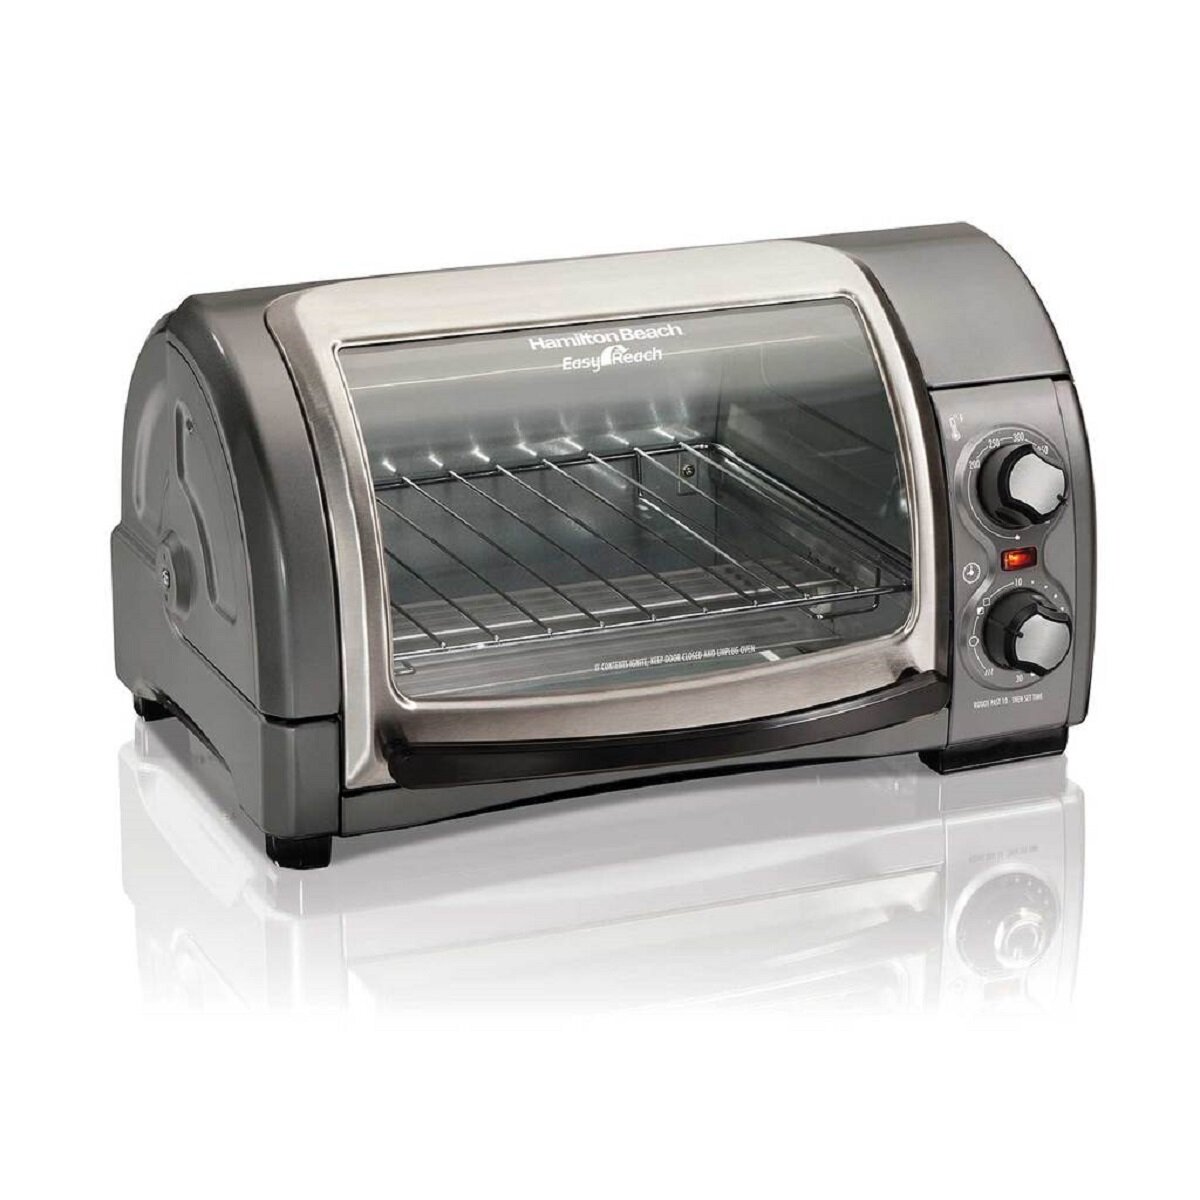 Hamilton Beach Easy Reach Toaster Oven With Roll Top Door, Toasters & Ovens, Furniture & Appliances